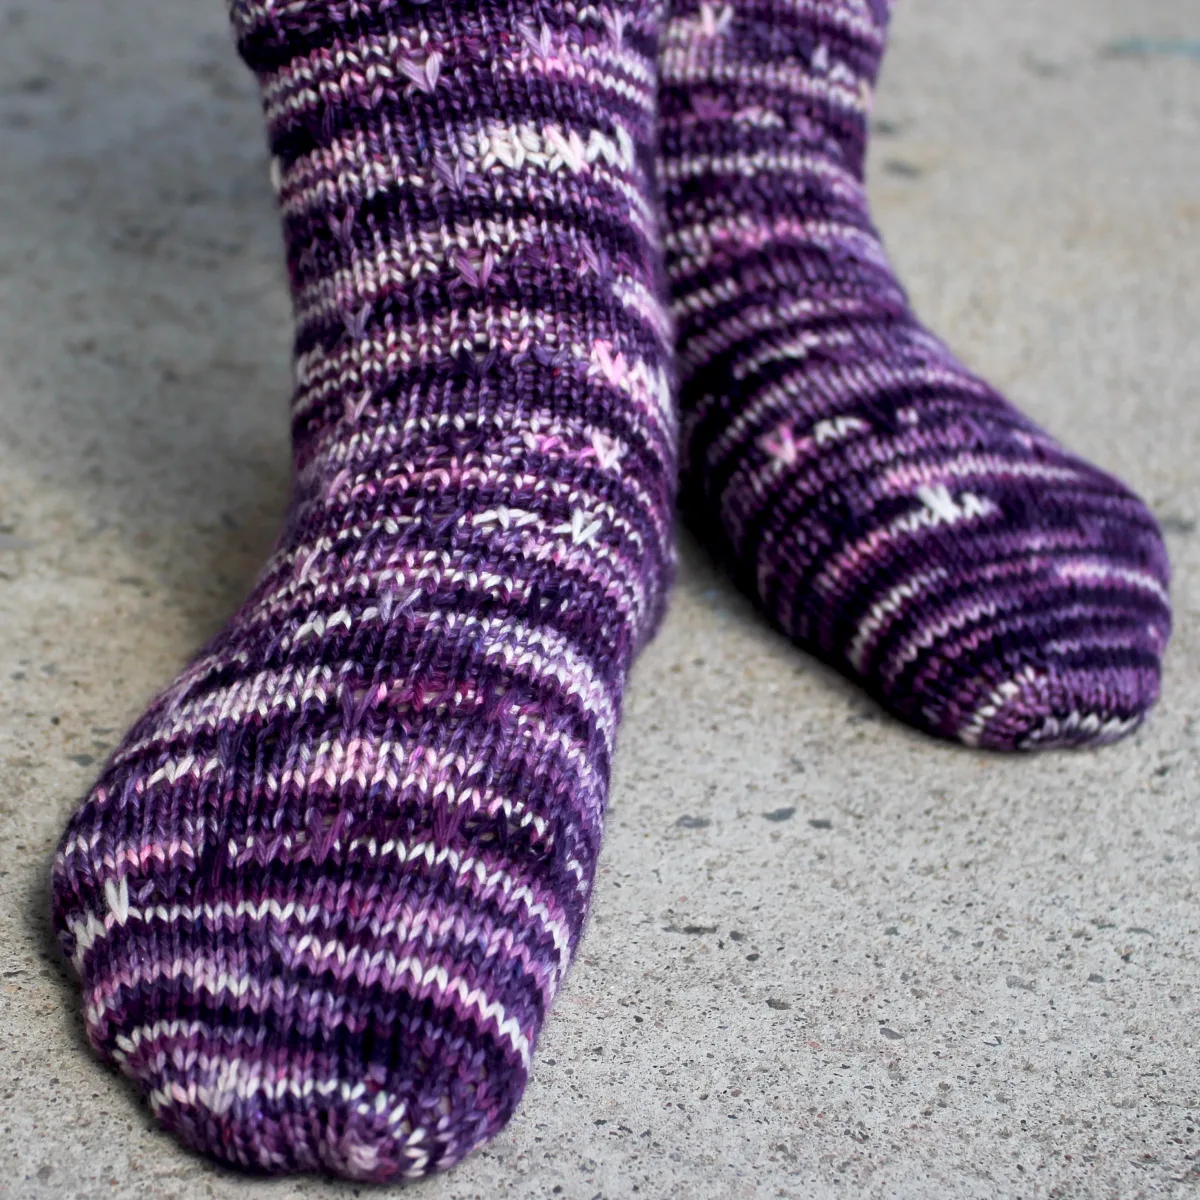 Feet wearing dark purple, pink, and white socks with slipped-stitch texture.